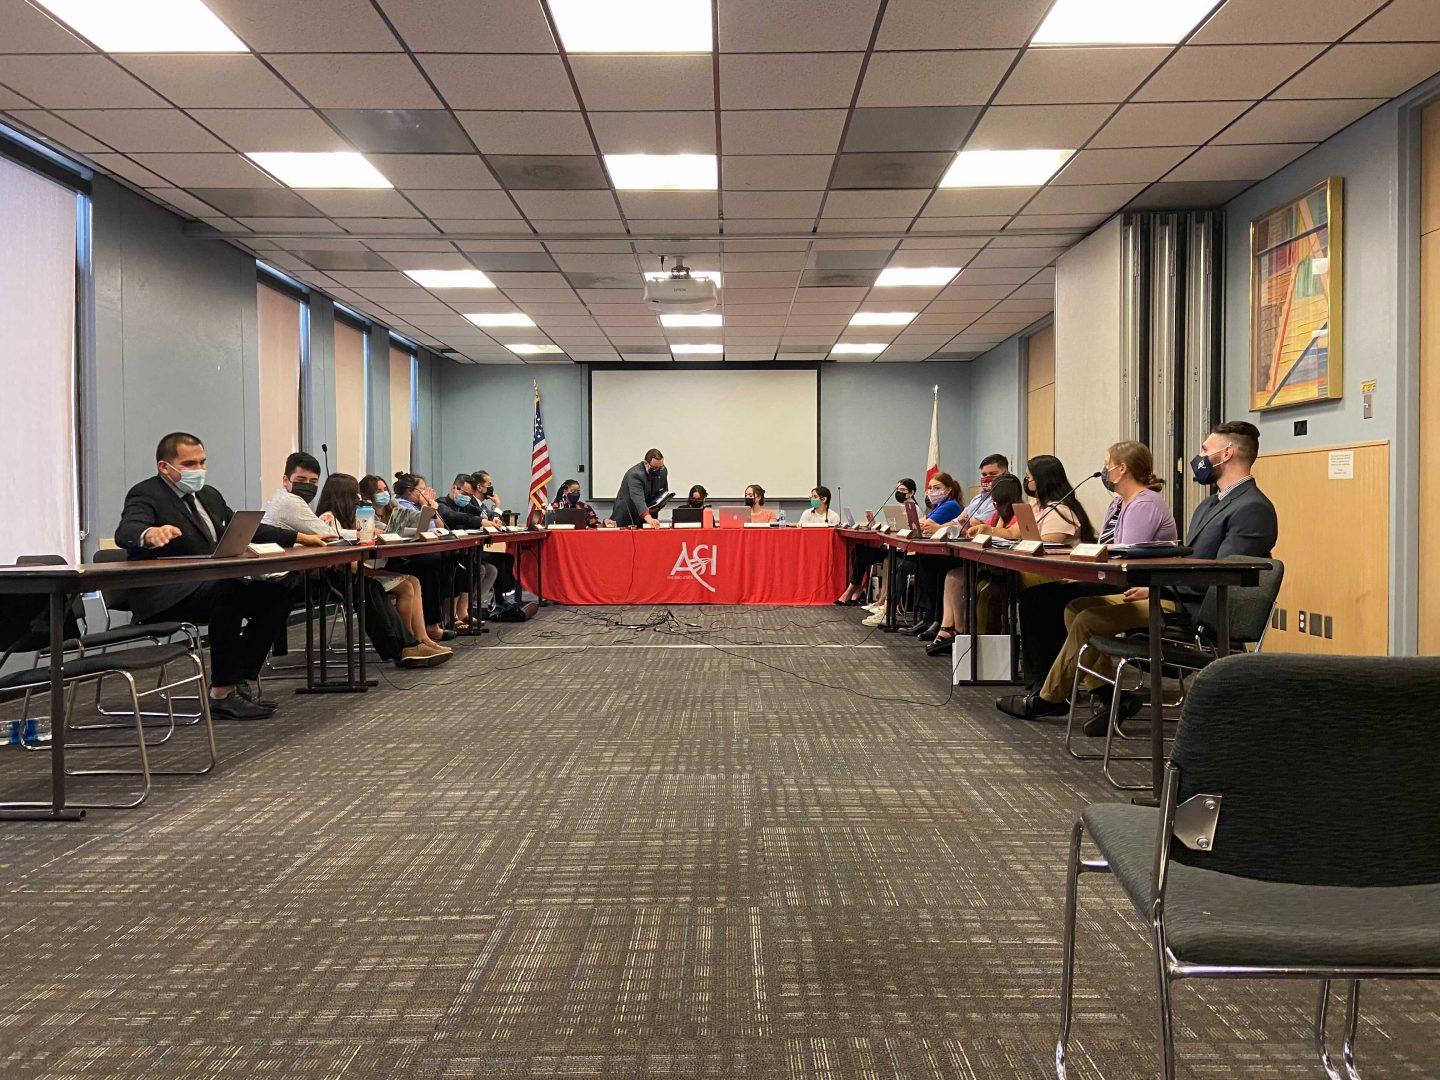 ASI senators met to address students COVID-19 concerns and also voted on a new executive vice president. (Edward Lopez/The Collegian)